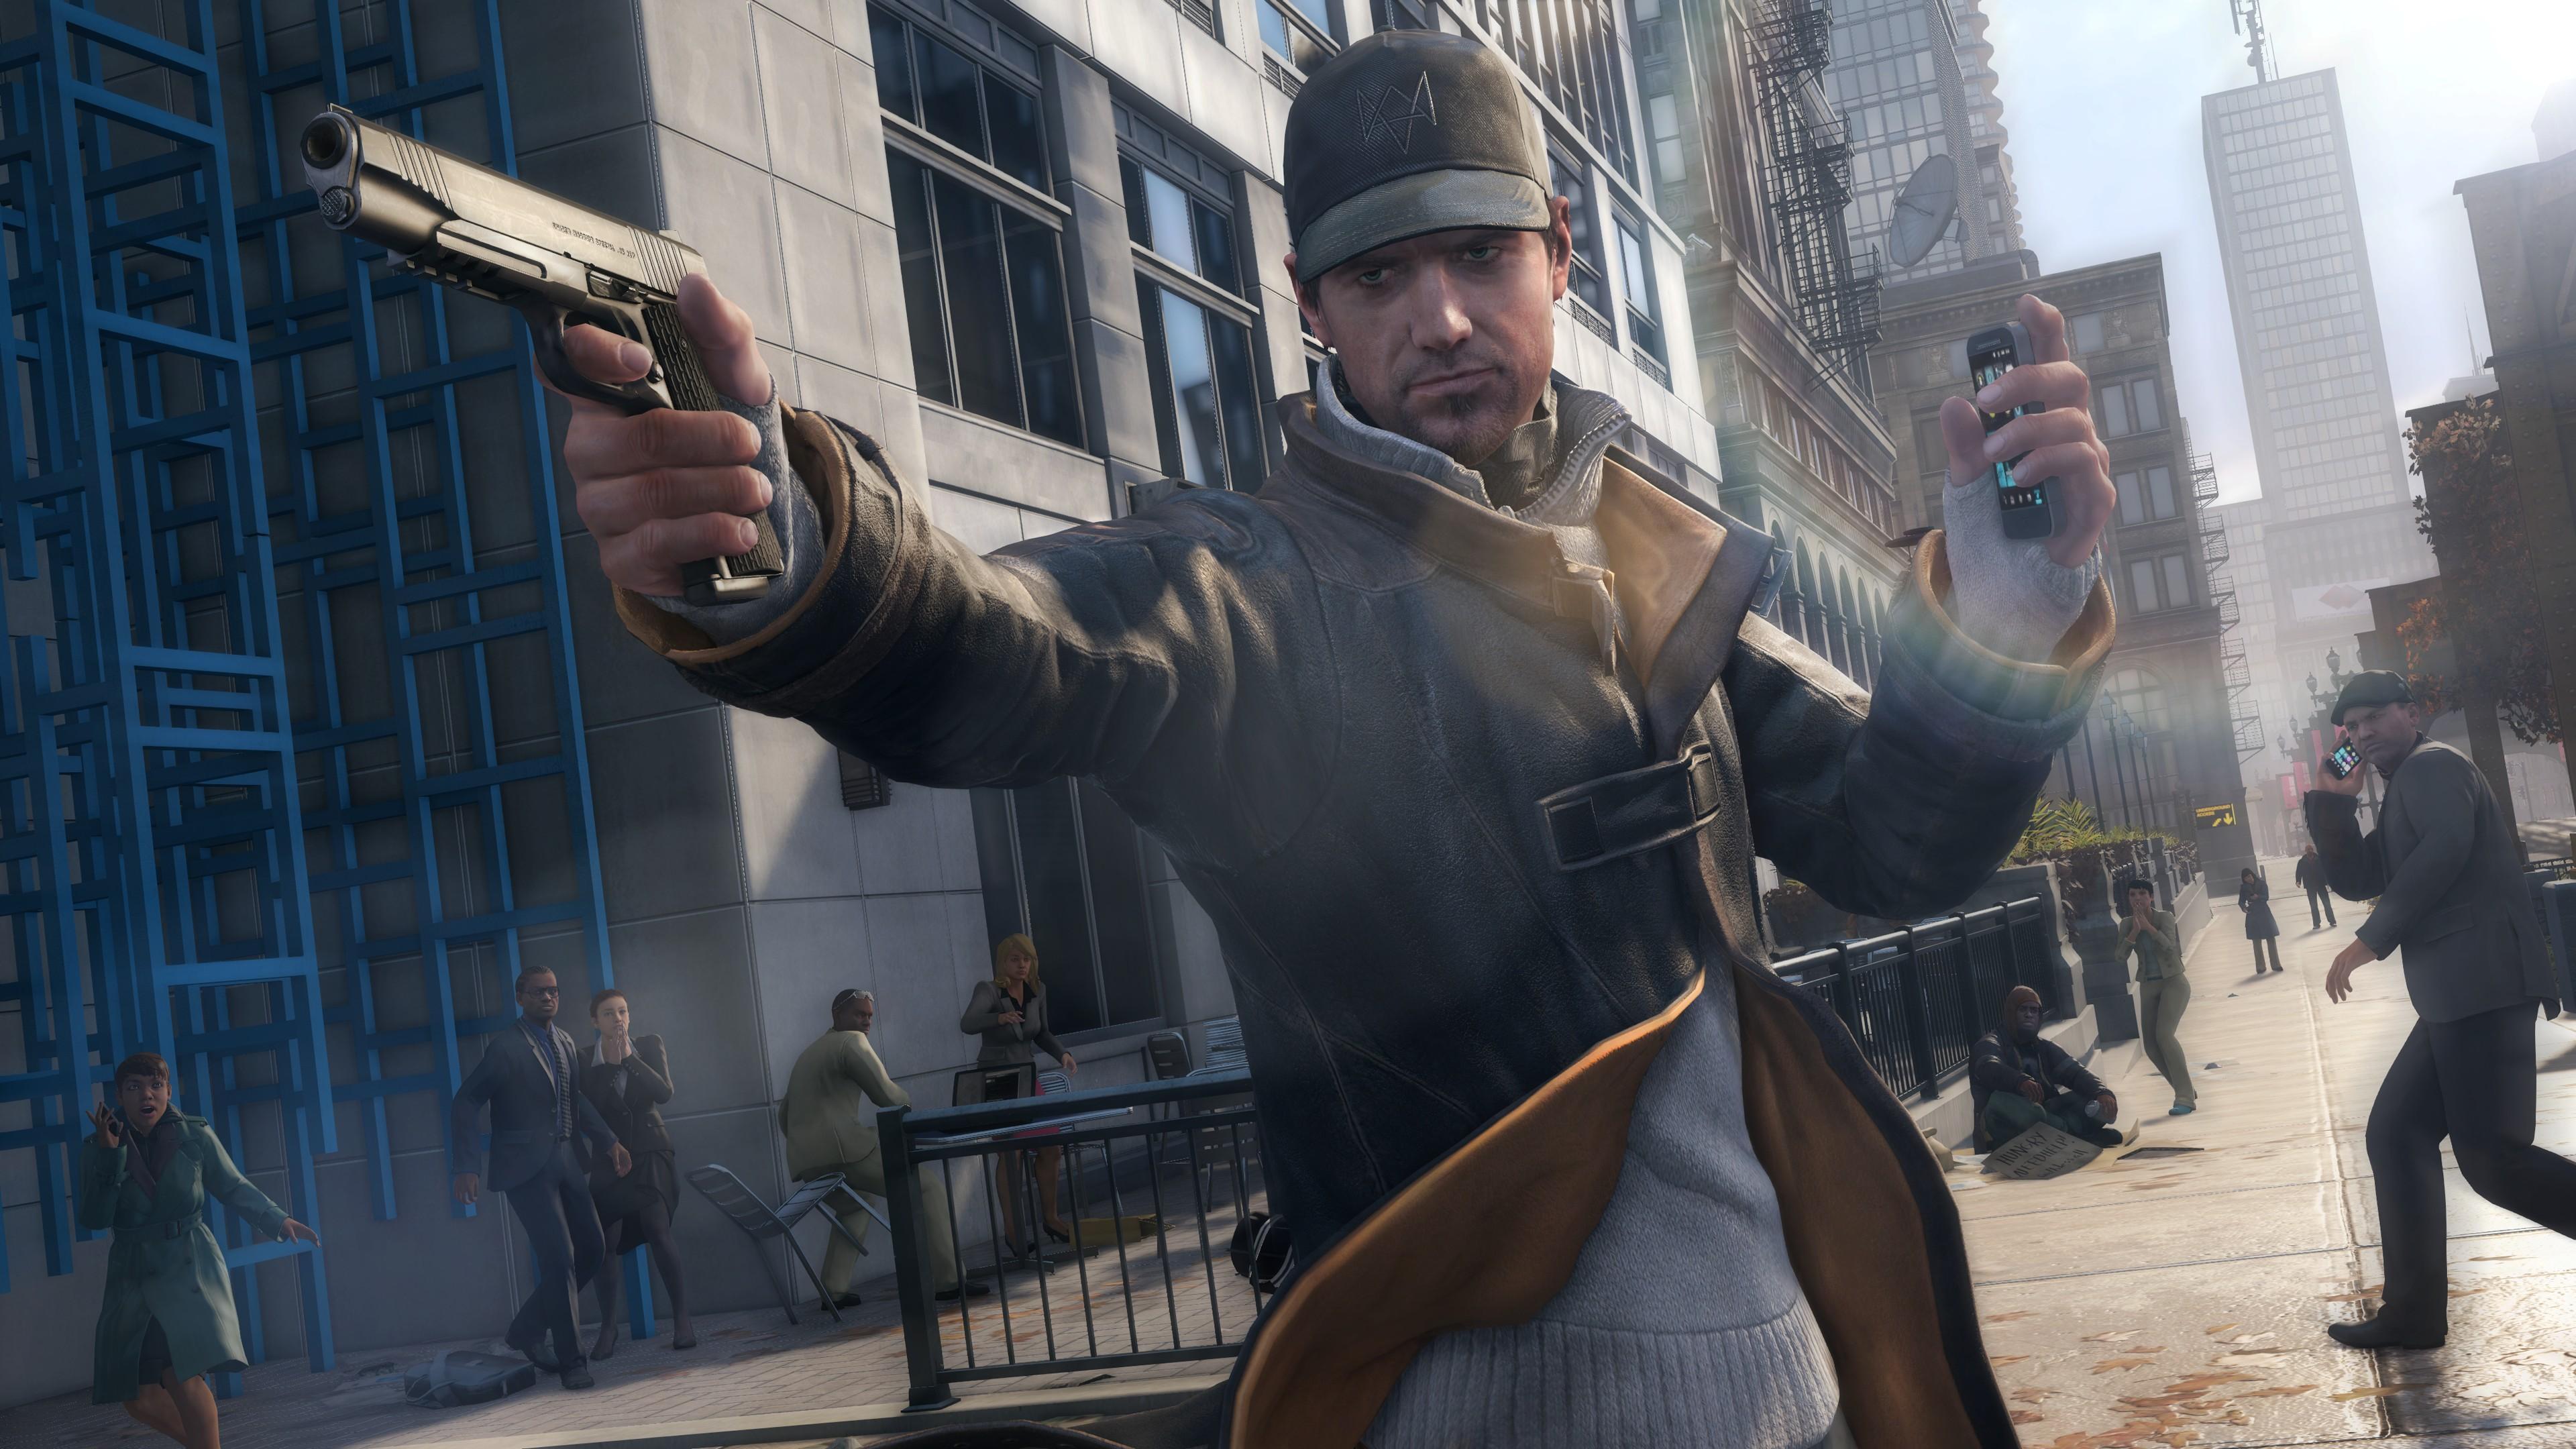 Watch Dogs Live Wallpaper - Watch Dogs Aiden Pearce Game - HD Wallpaper 